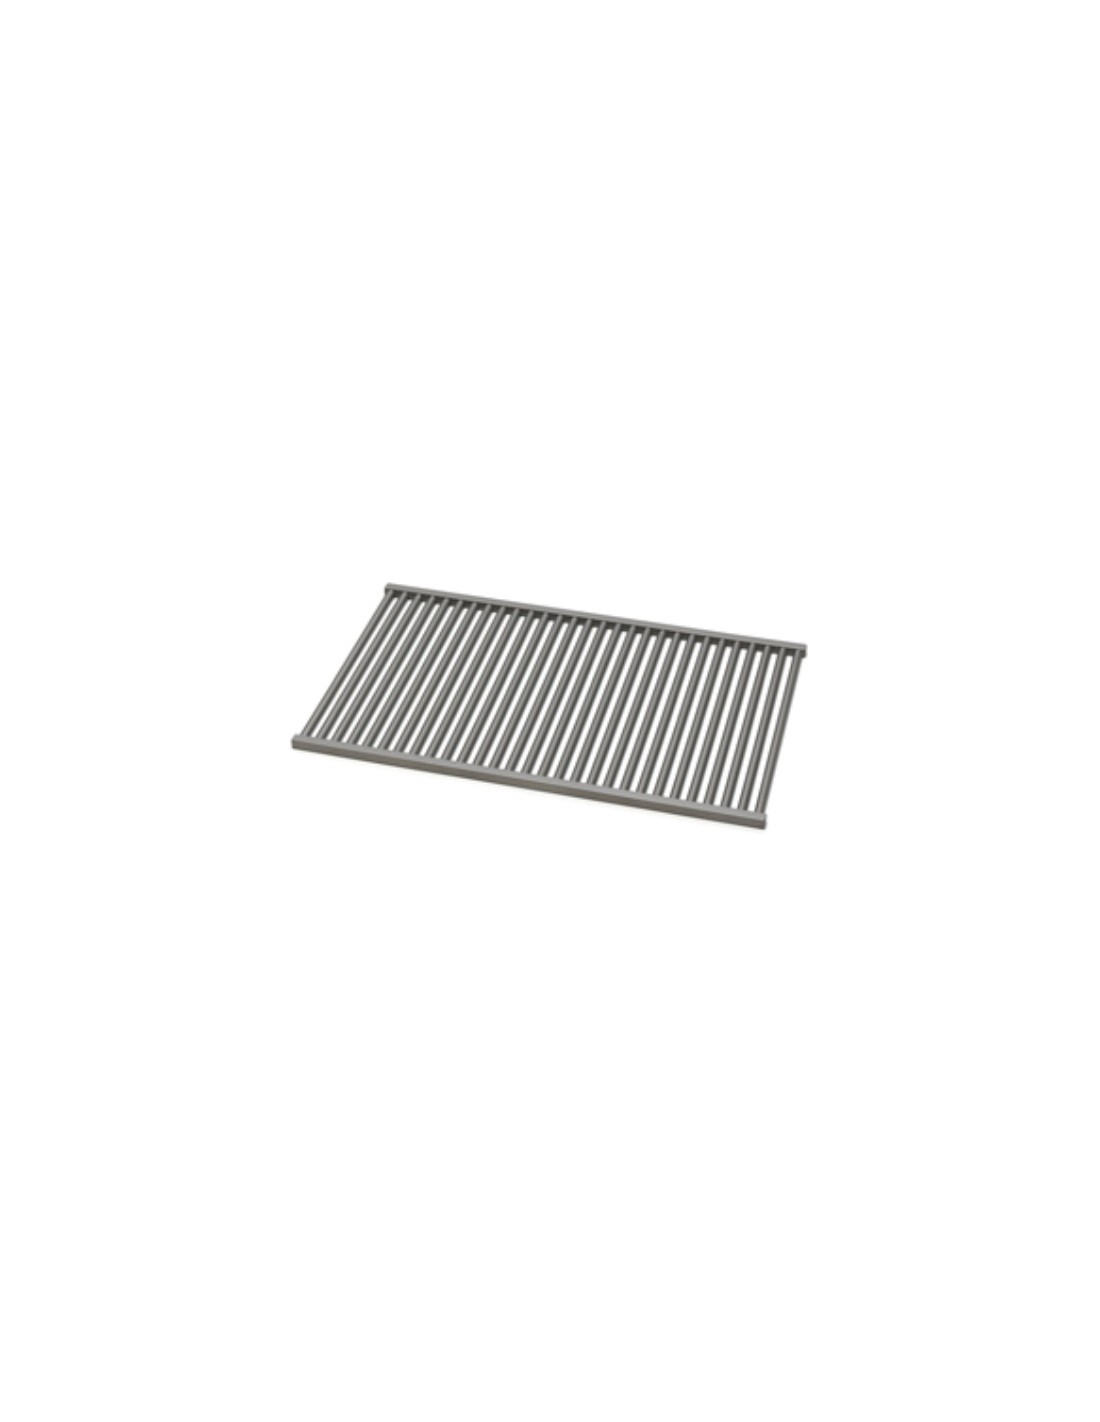 Grid 1/1 GN - For grill cooking